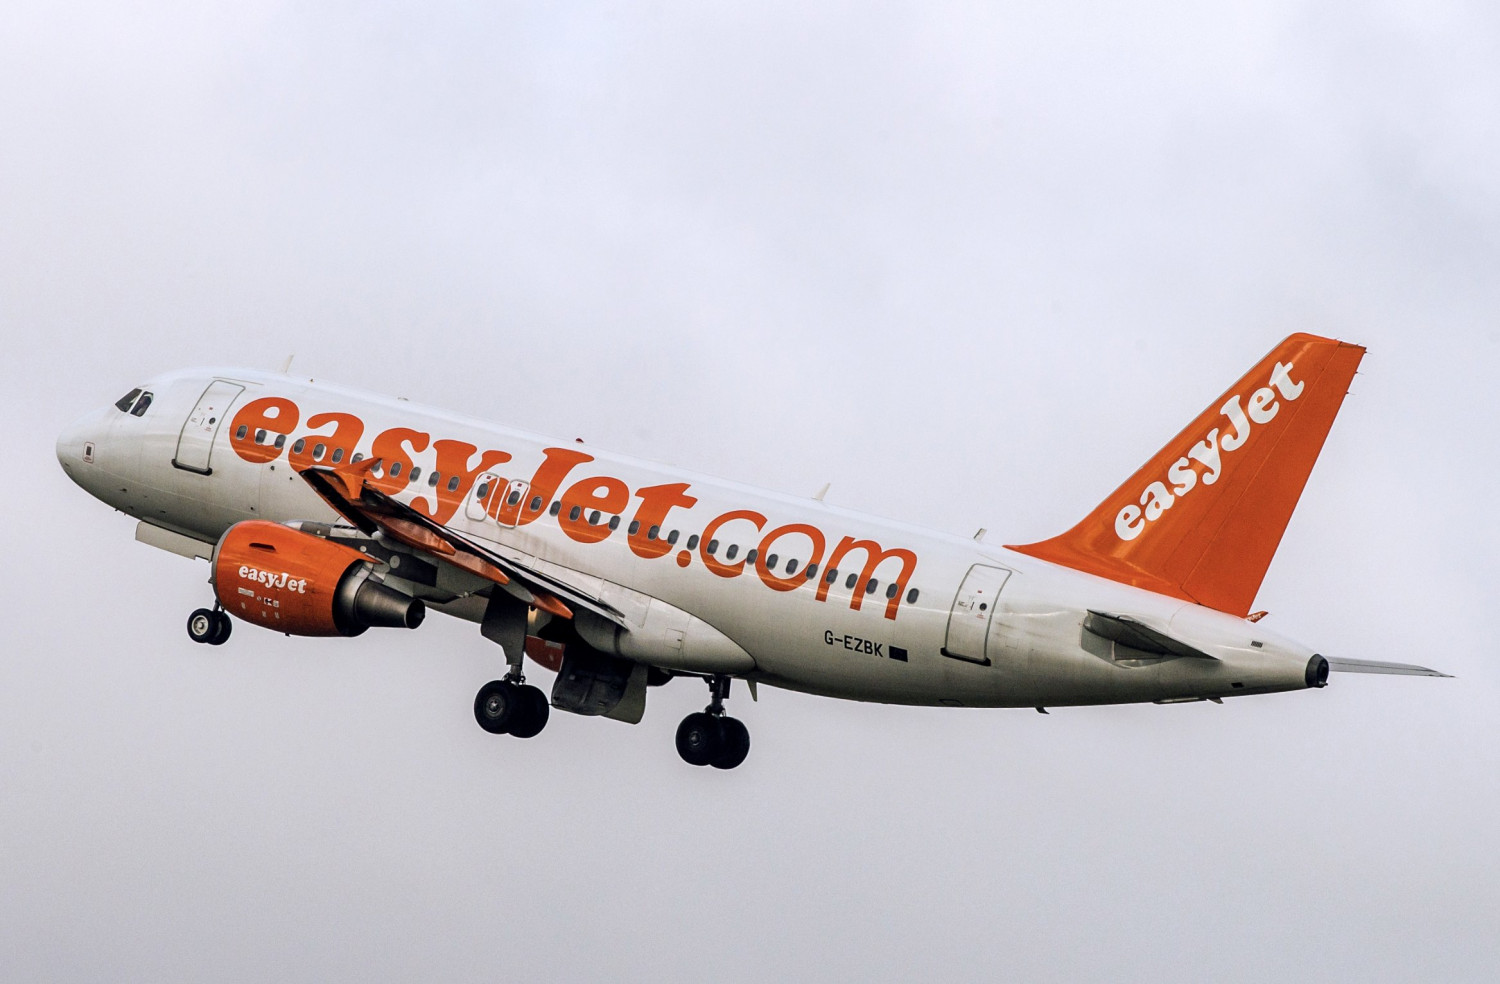 EasyJet plane taking off into clouds